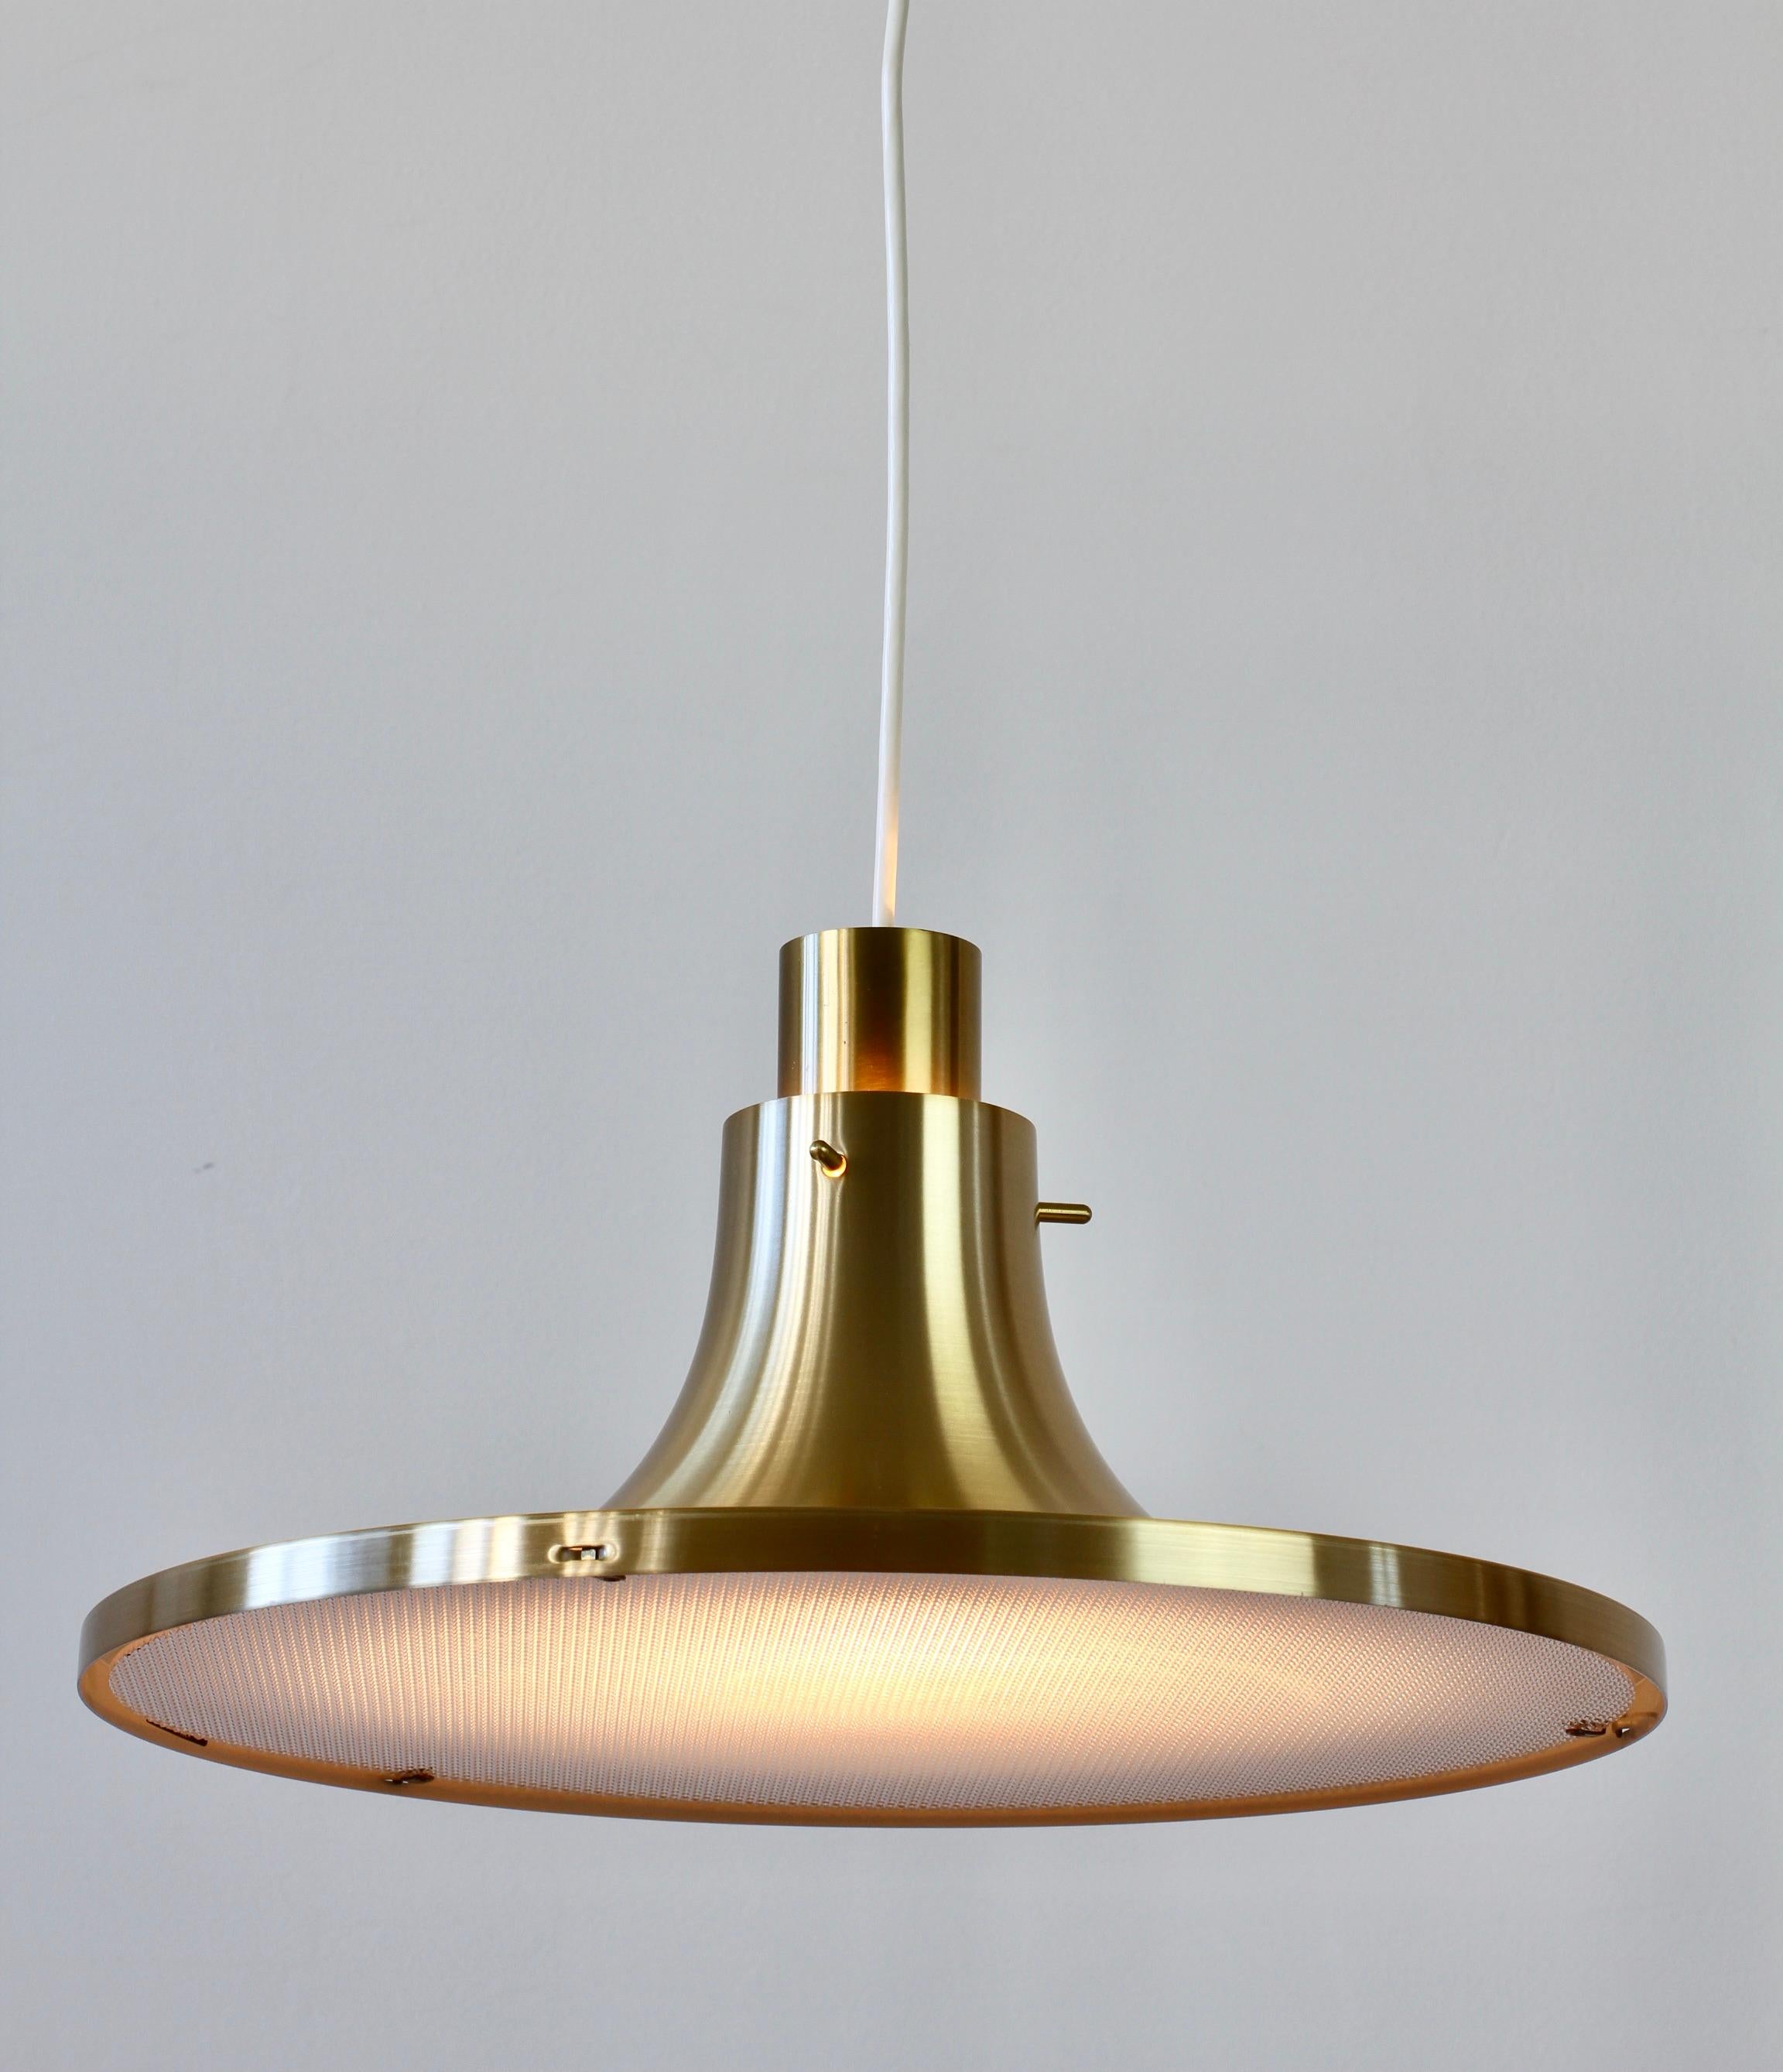 'New Old Stock' Scandinavian Modern hanging pendant ceiling light / lamp designed by Hans-Agne Jakobssen for AB Markaryd of Sweden with original packaging. Extremely rare to find in this condition and in the full 'brass' 'gold' colored finish.